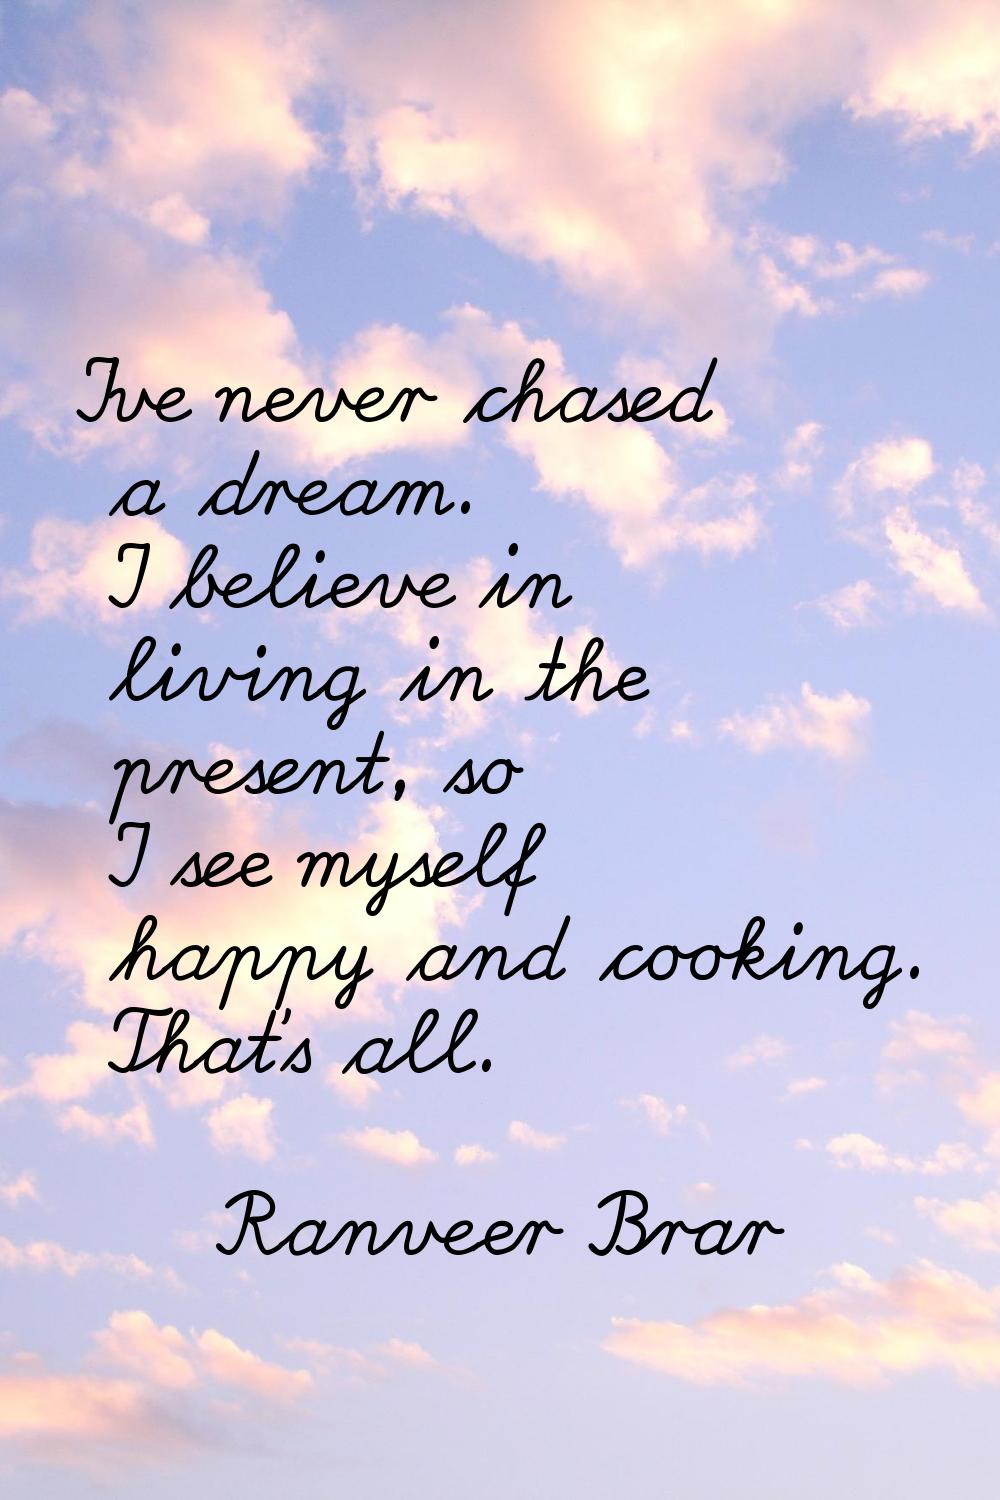 I've never chased a dream. I believe in living in the present, so I see myself happy and cooking. T